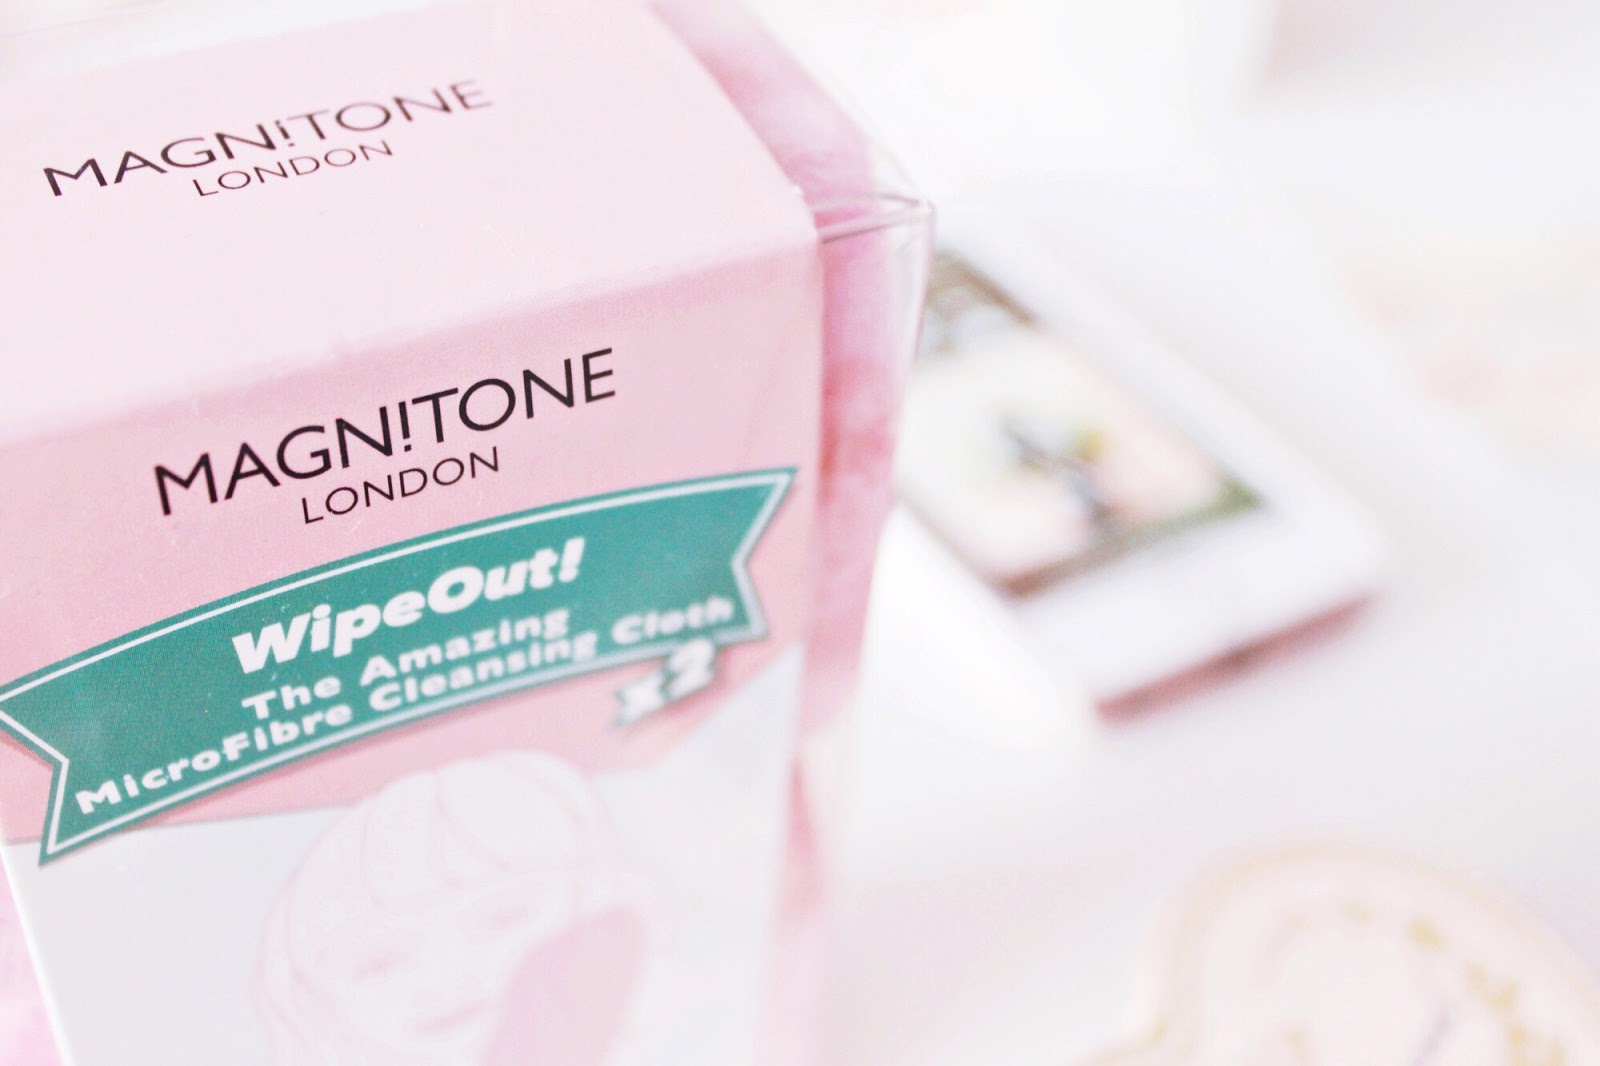 Barefaced Magnitone London Cleanser blog review